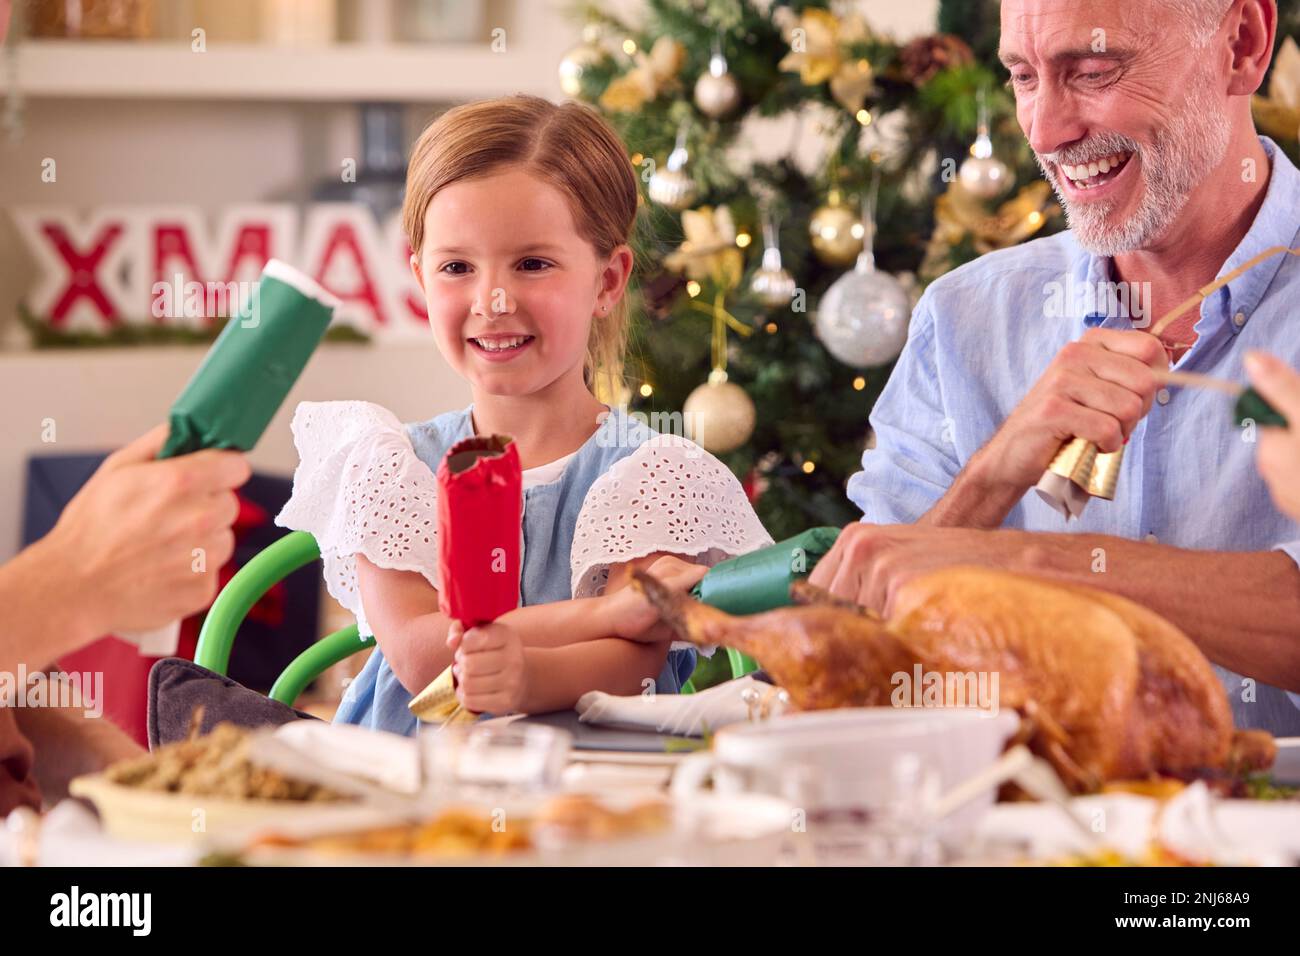 Multi-Generation Family Celebrating Christmas At Home Pulling Crackers Before Eating Meal Together Stock Photo